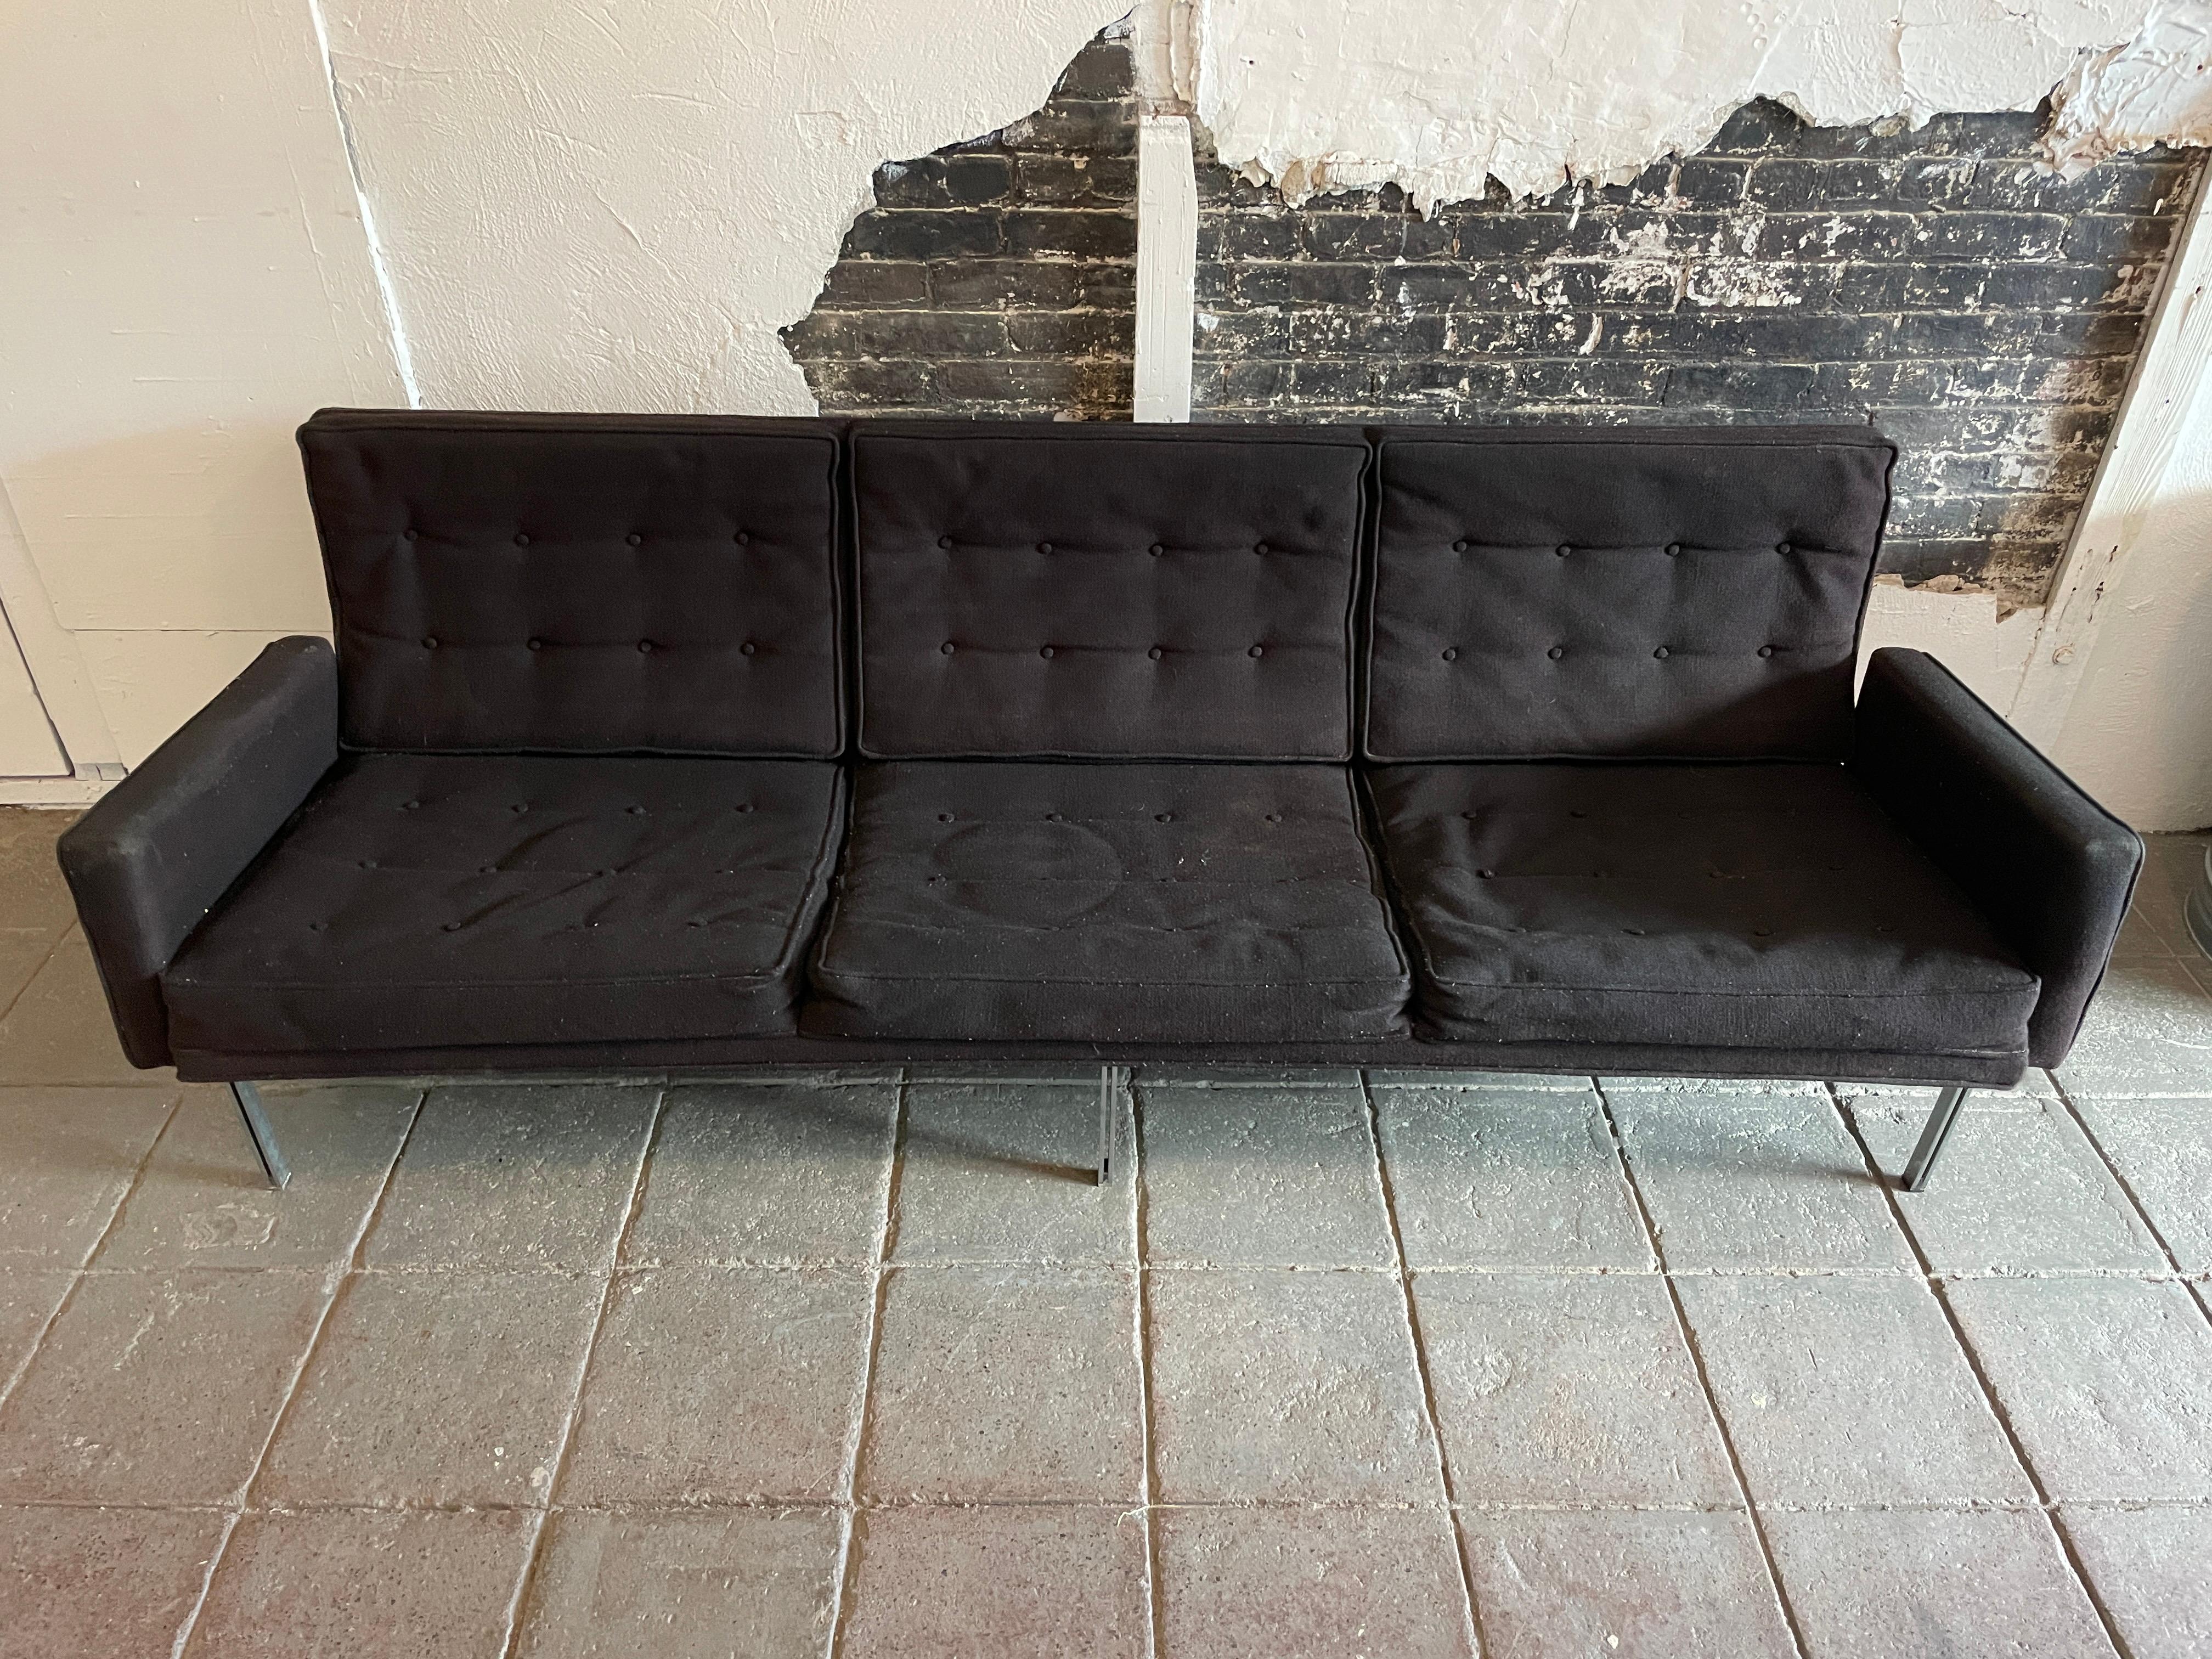 Mid-Century Modern Mid century Florence Knoll Sofa #57 Parallel Bar System - needs upholstery  For Sale